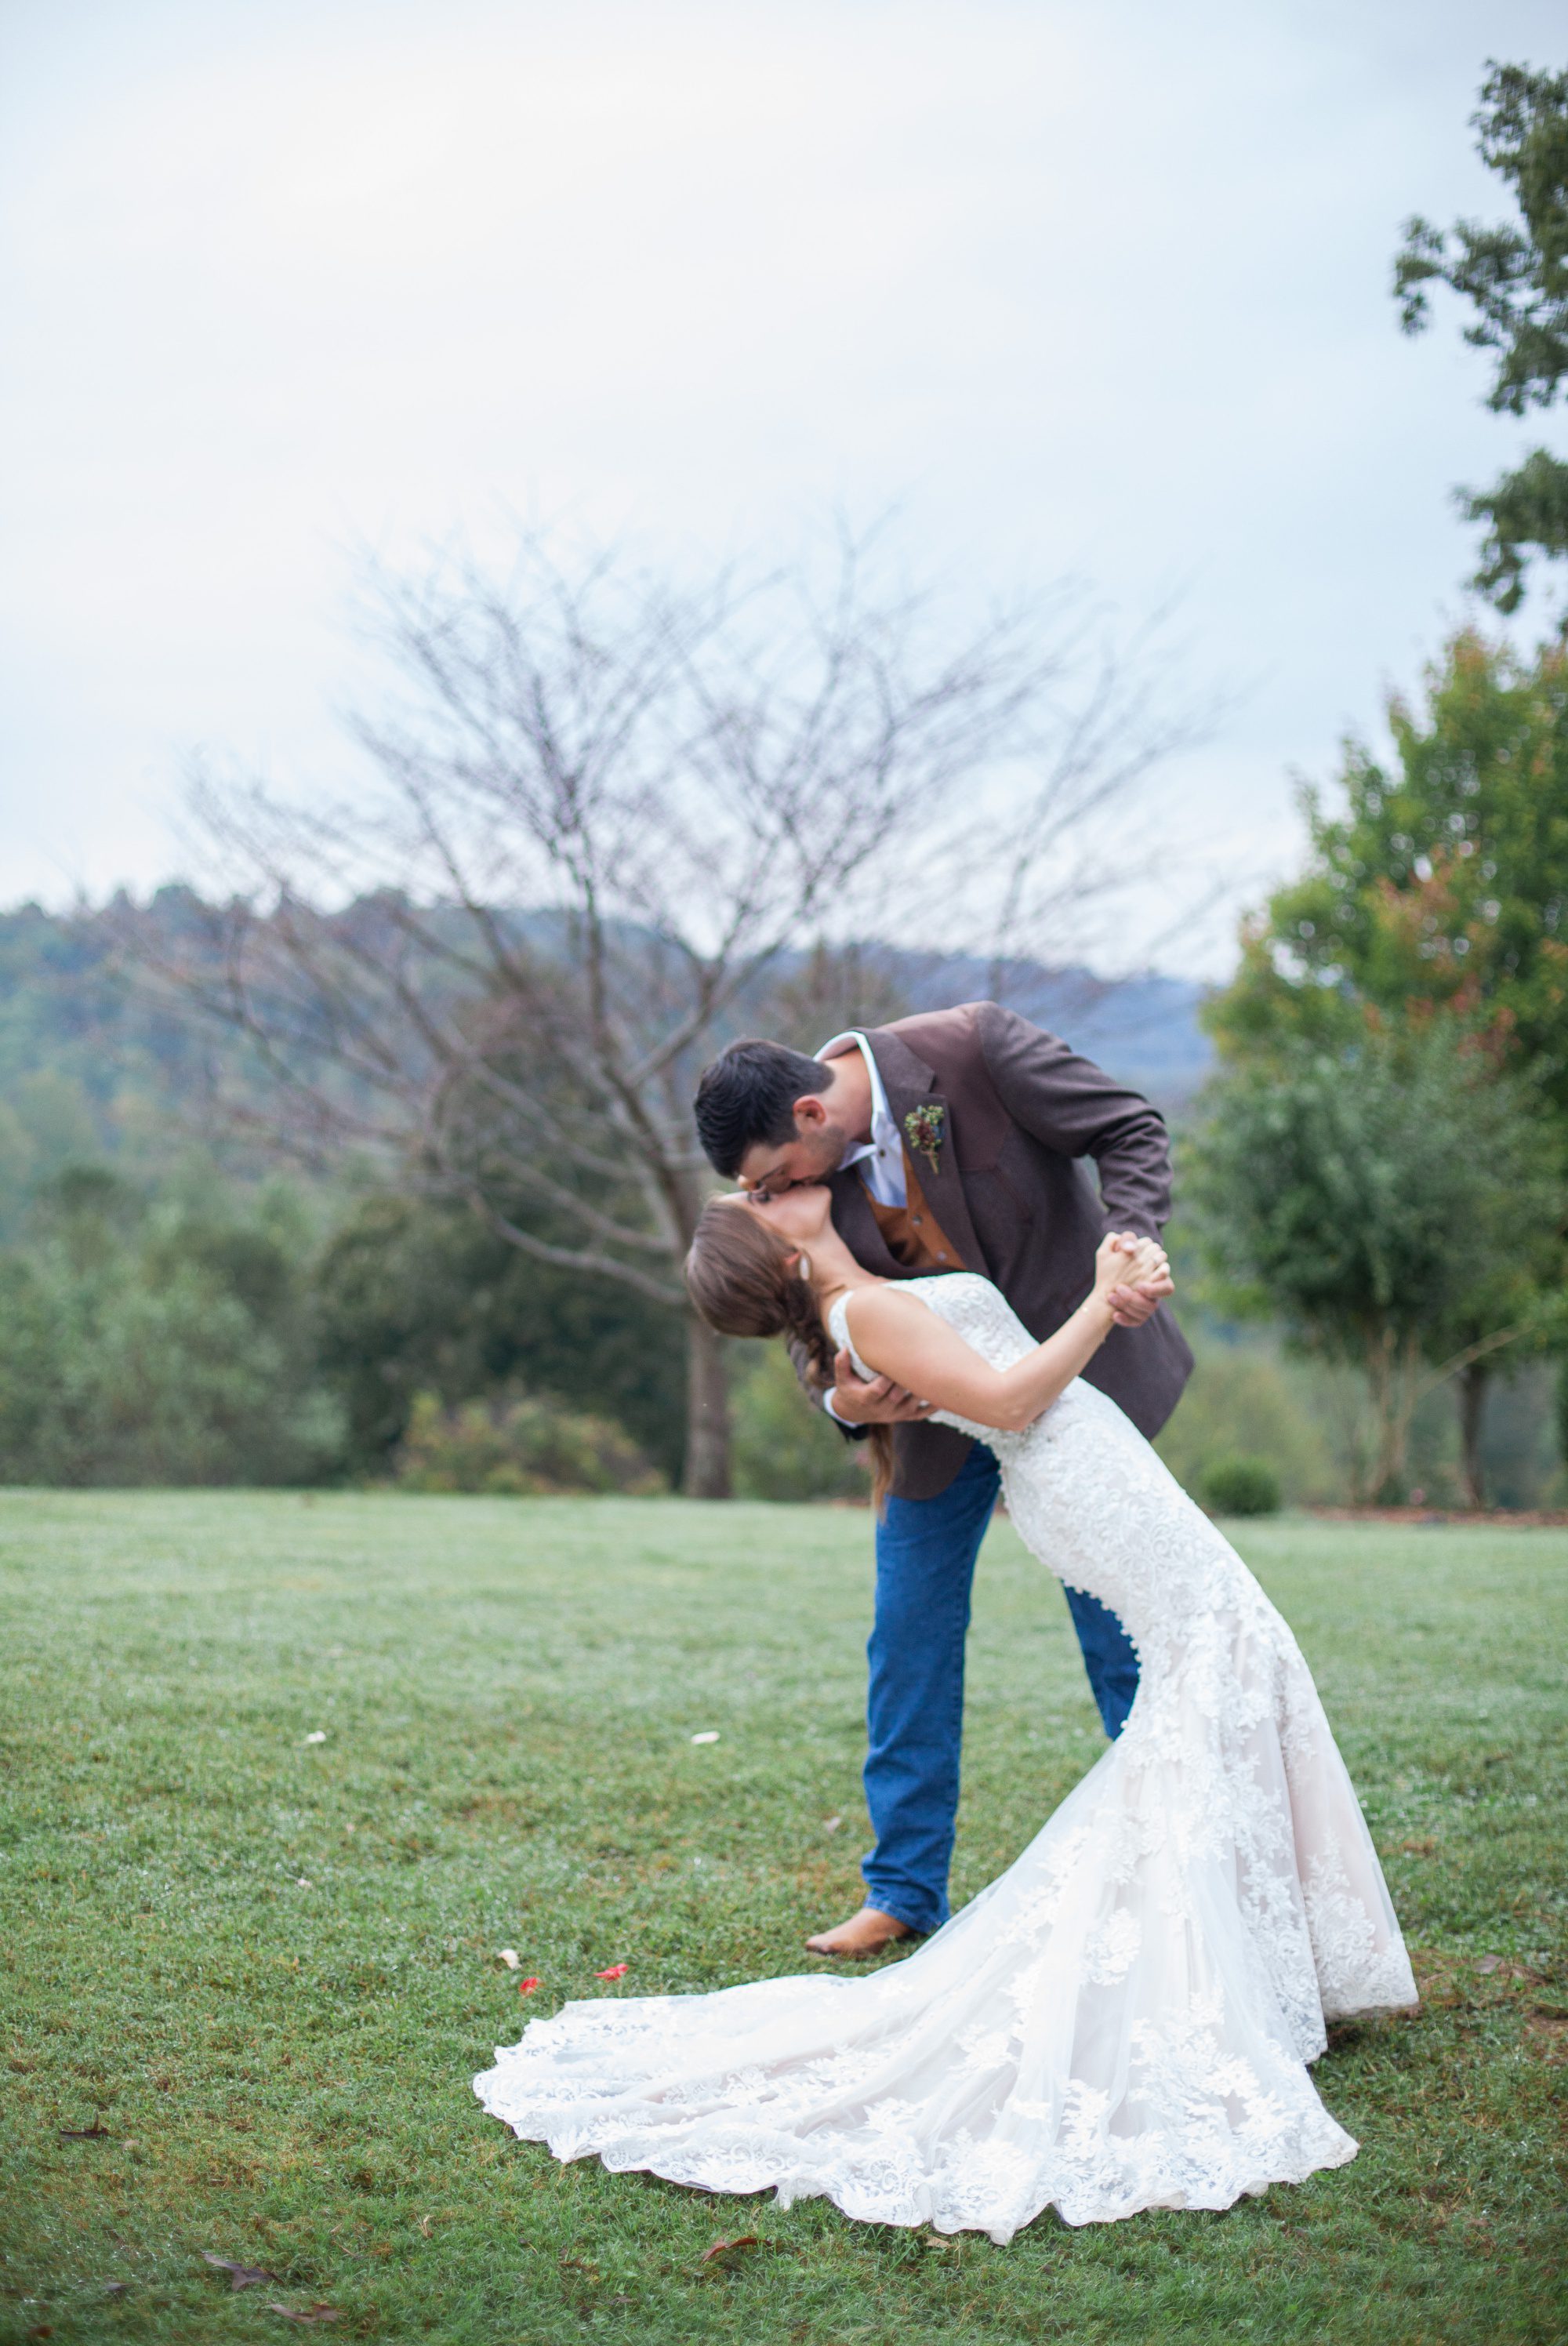 Groom Dips bride for a photo after wedding ceremony photography at Front Porch Farms, Wedding photography by Krista Lee